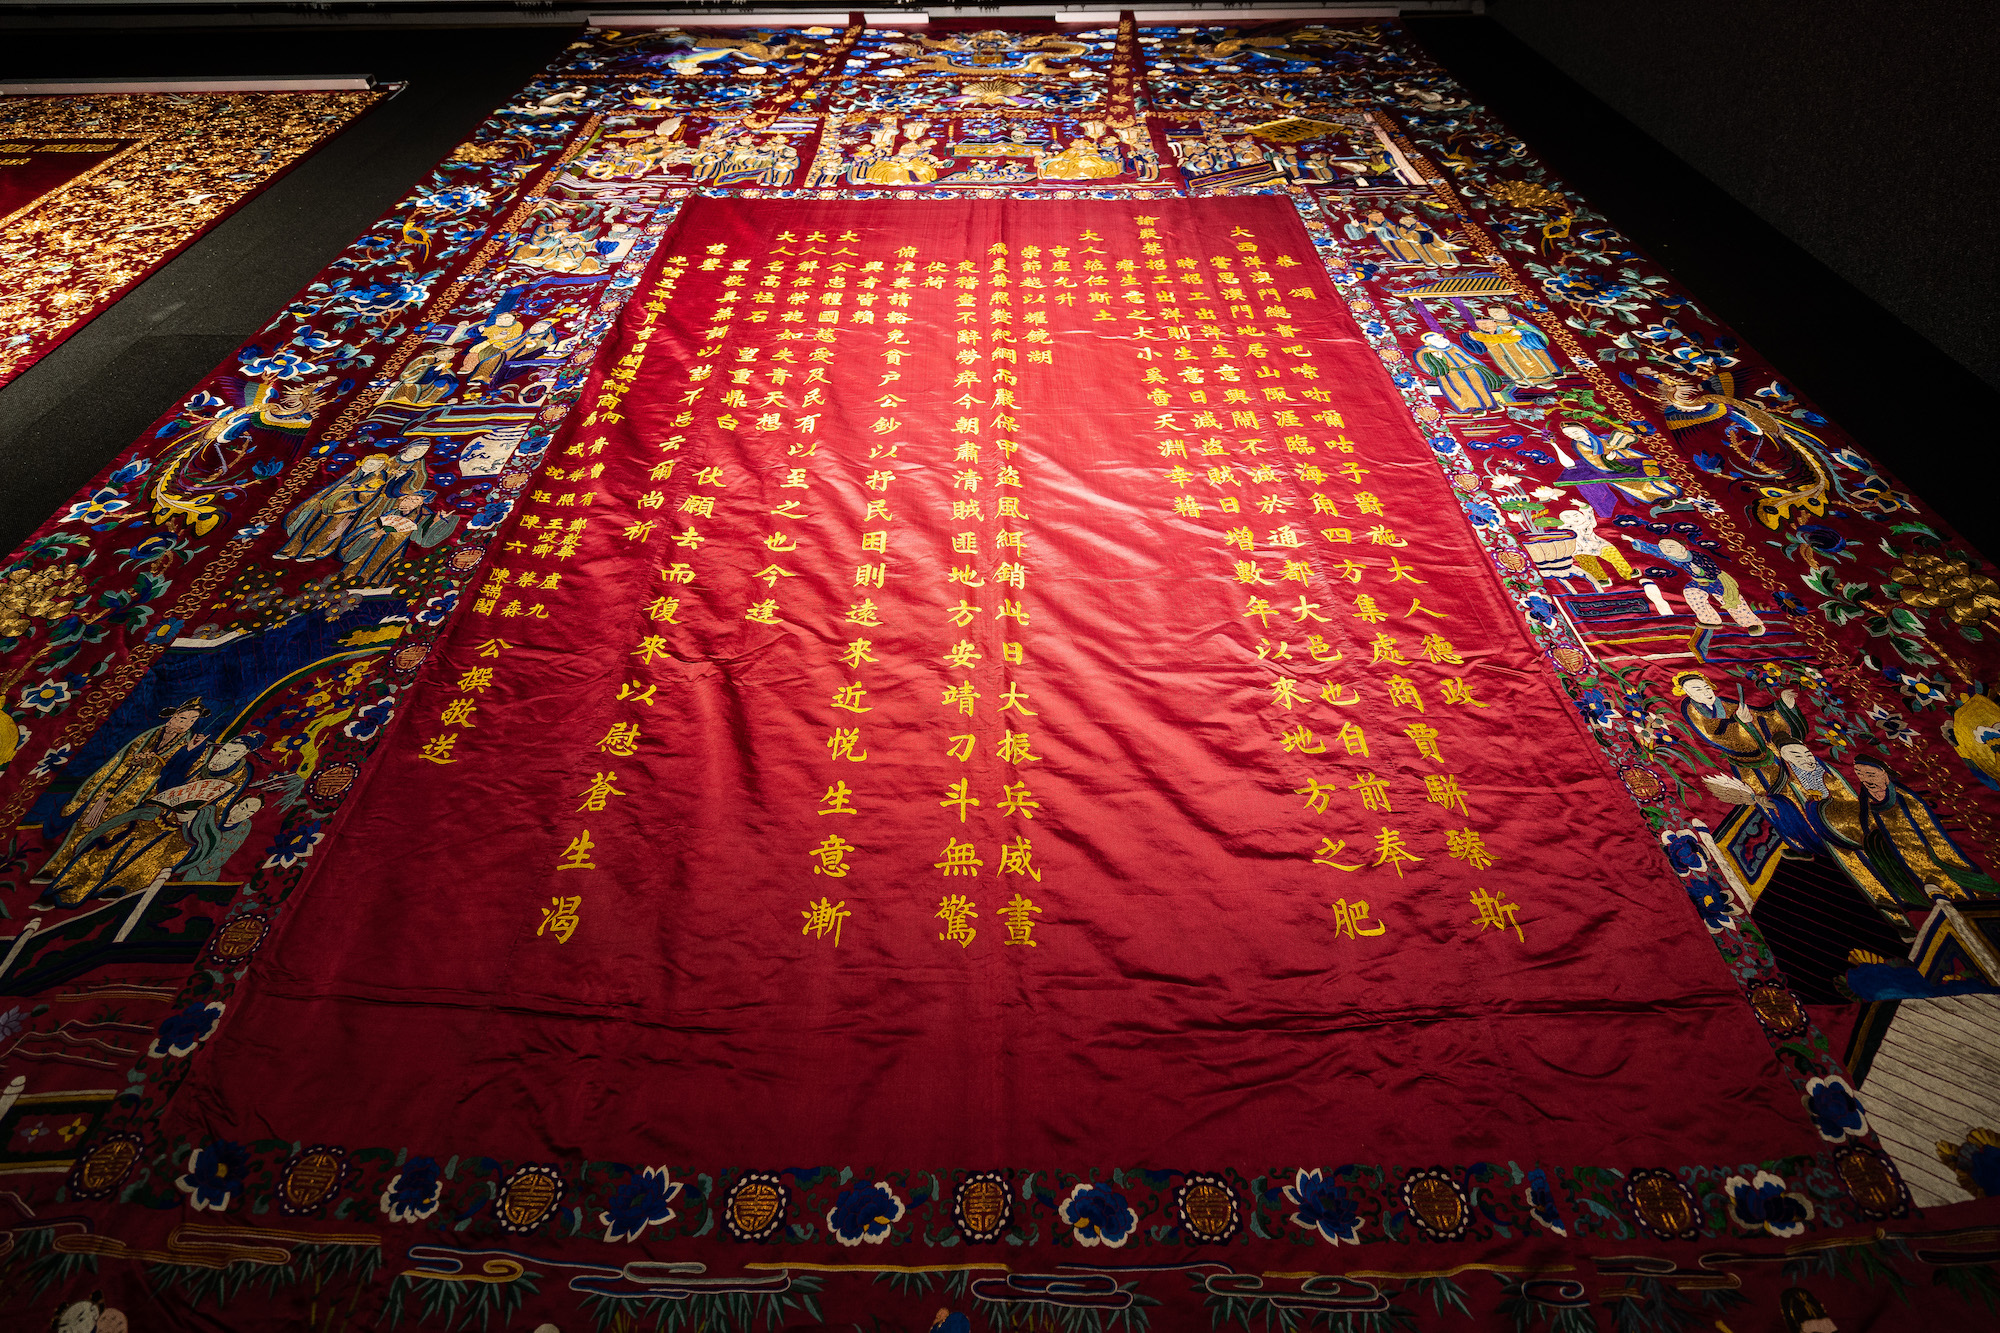 Guangdong embroidery - tapestries